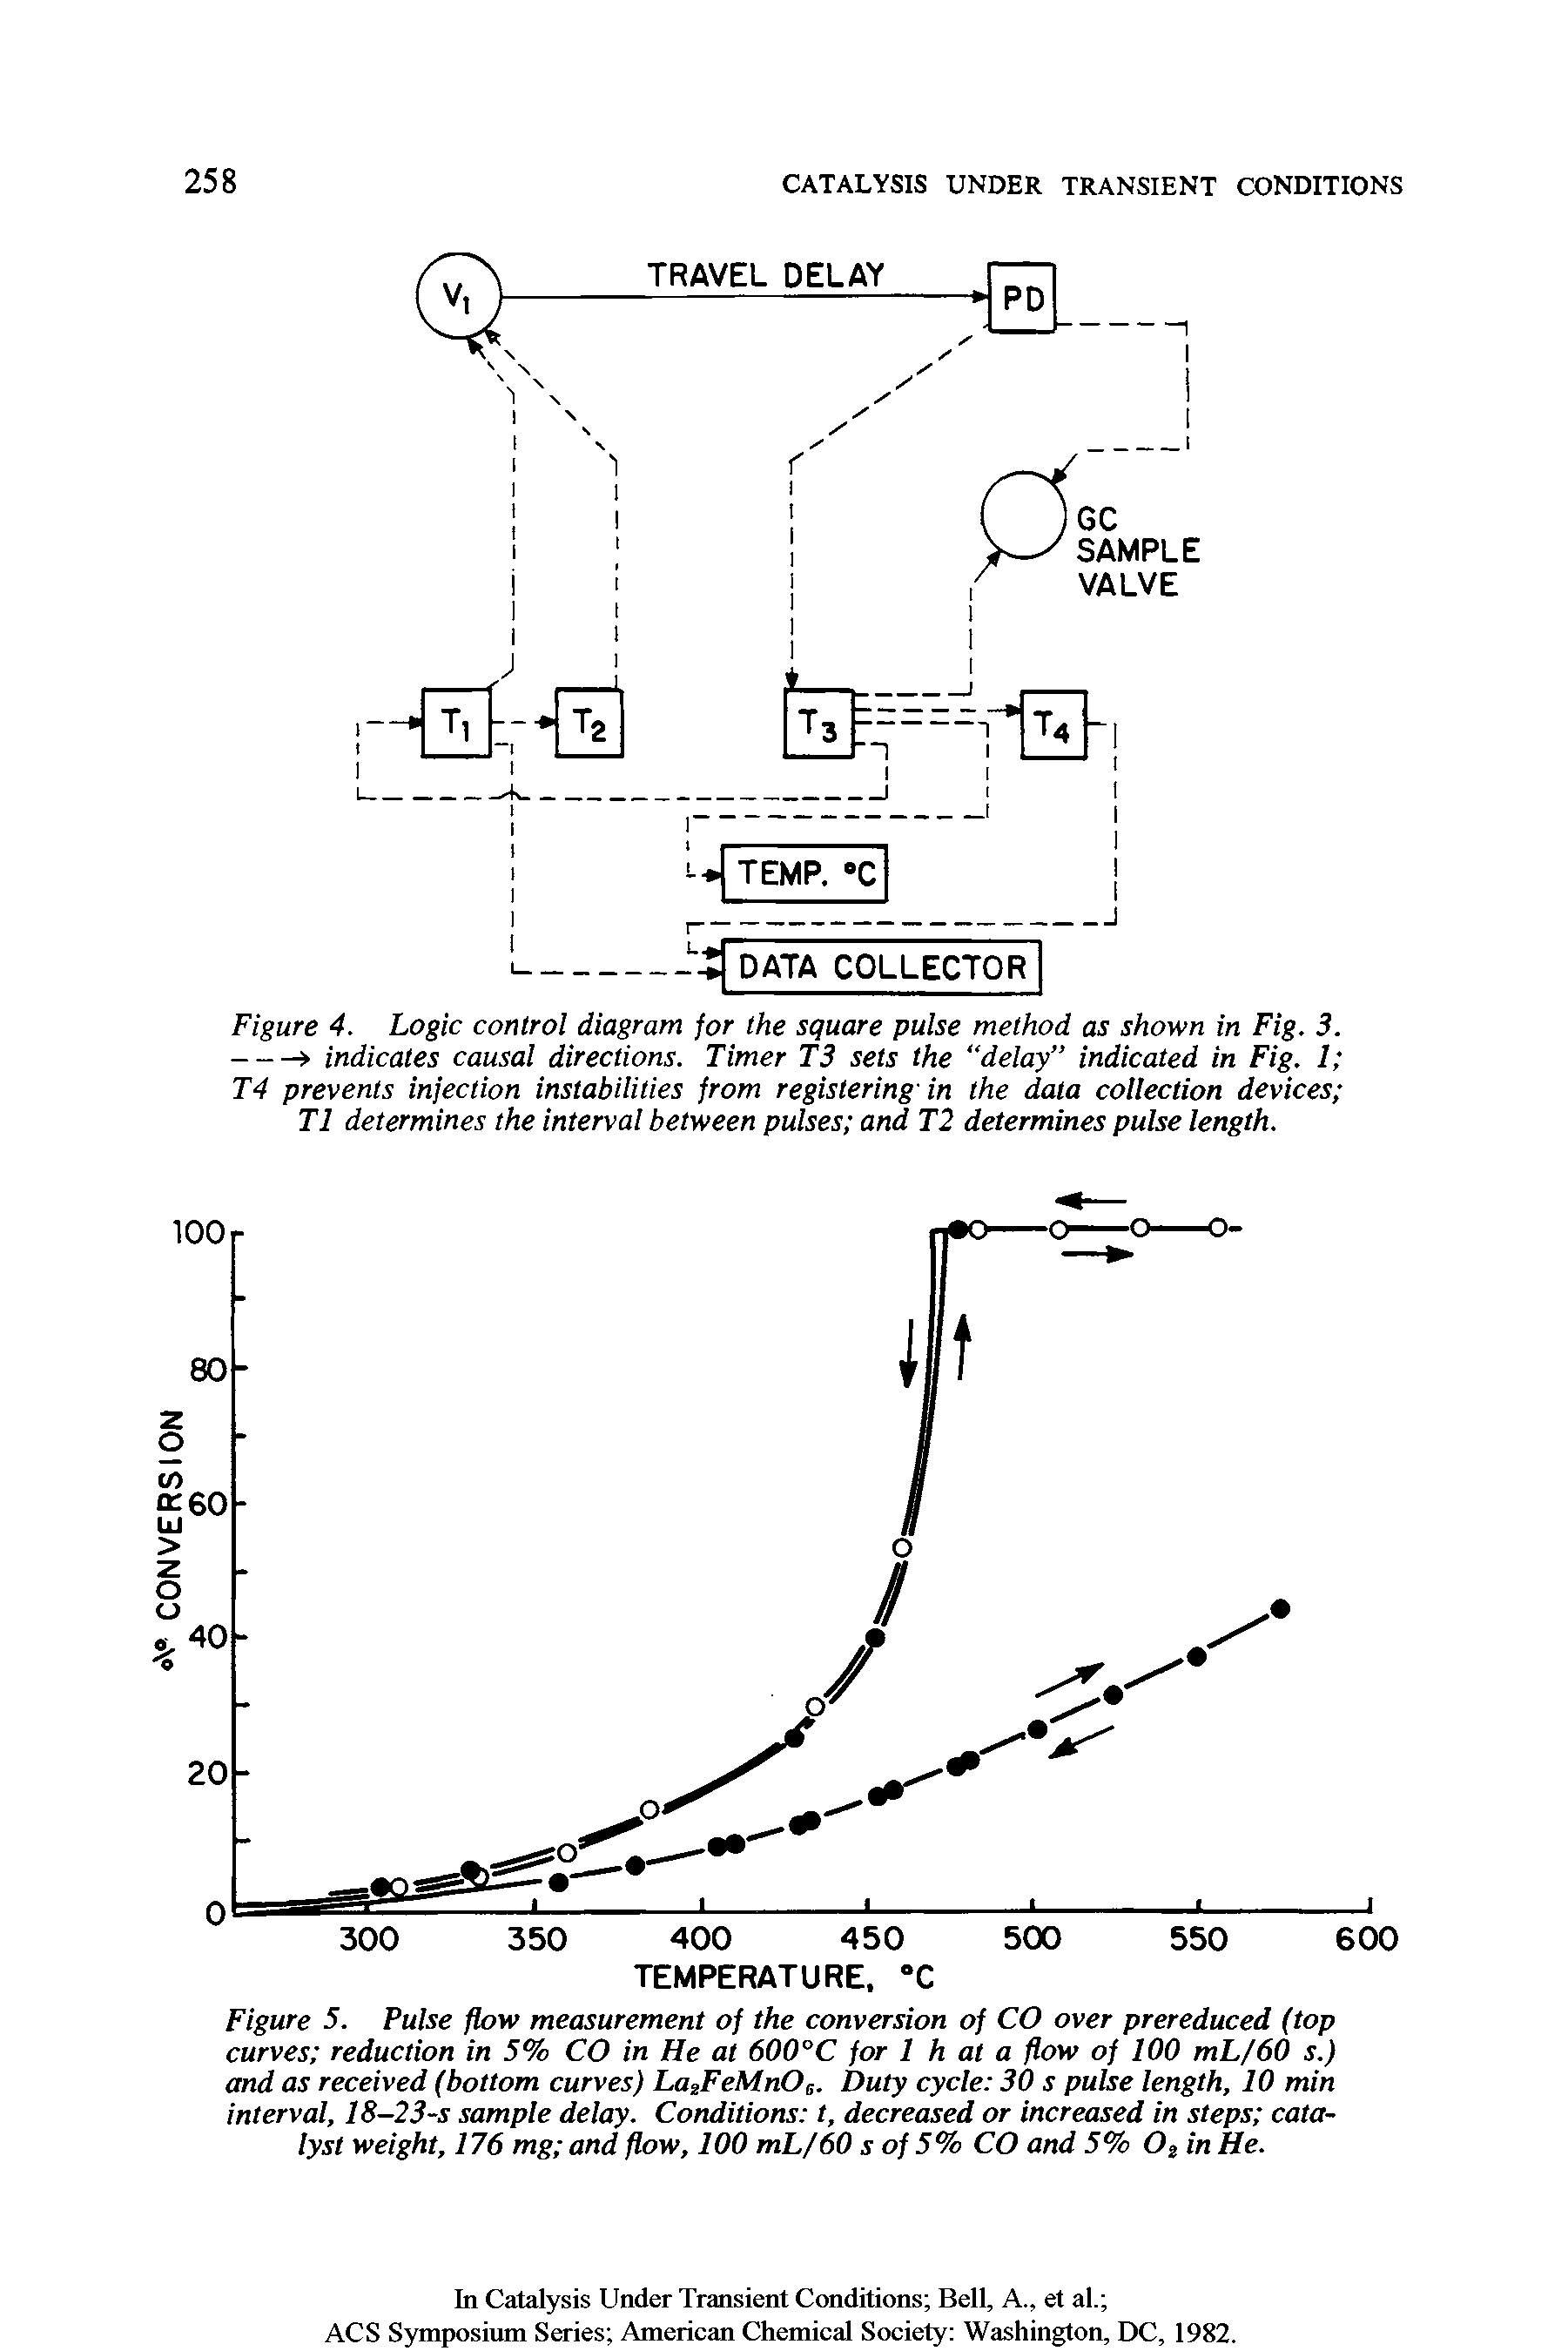 Figure 5. Pulse flow measurement of the conversion of CO over prereduced (top curves reduction in 5% CO in He at 600°C for 1 h at a flow of 100 mL/60 s.) and as received (bottom curves) La2FeMnOe. Duty cycle 30 s pulse length, 10 min interval, 18-23-s sample delay. Conditions t, decreased or increased in steps catalyst weight, 176 mg and flow, 100 mL/60 s of 5% CO and 5% OsinHe.